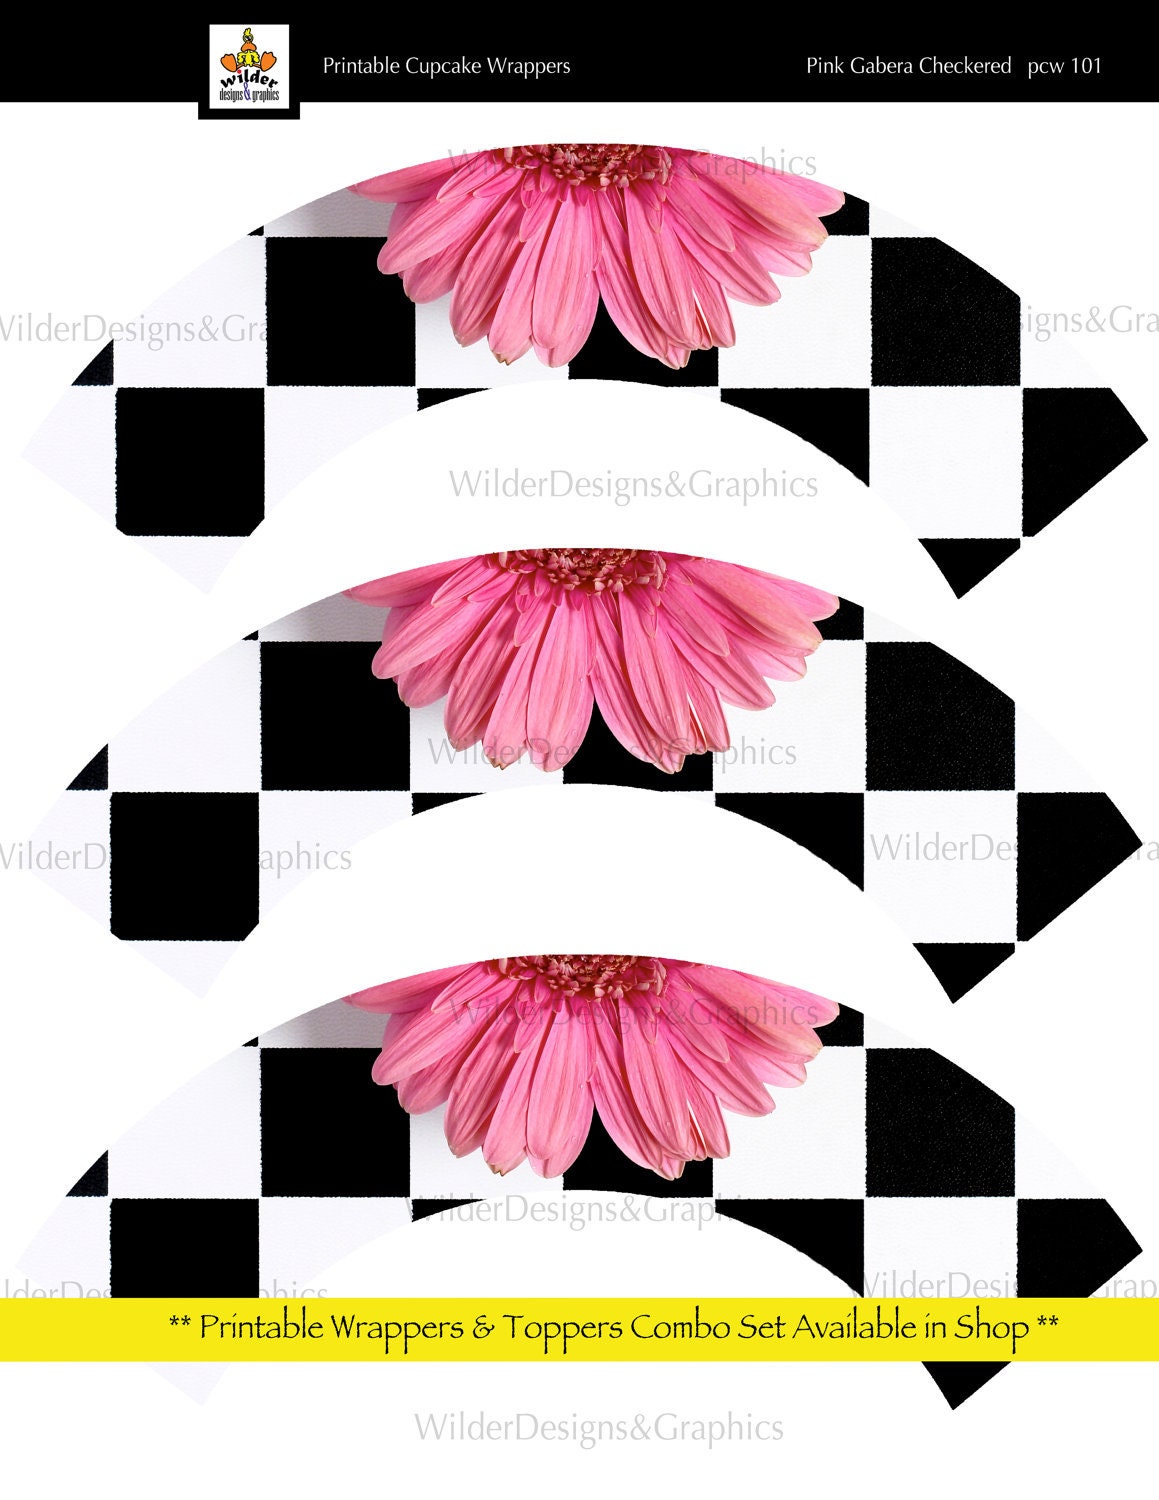 Printable Cupcake Wrappers - Checkered Pink Gabera (pcw101)